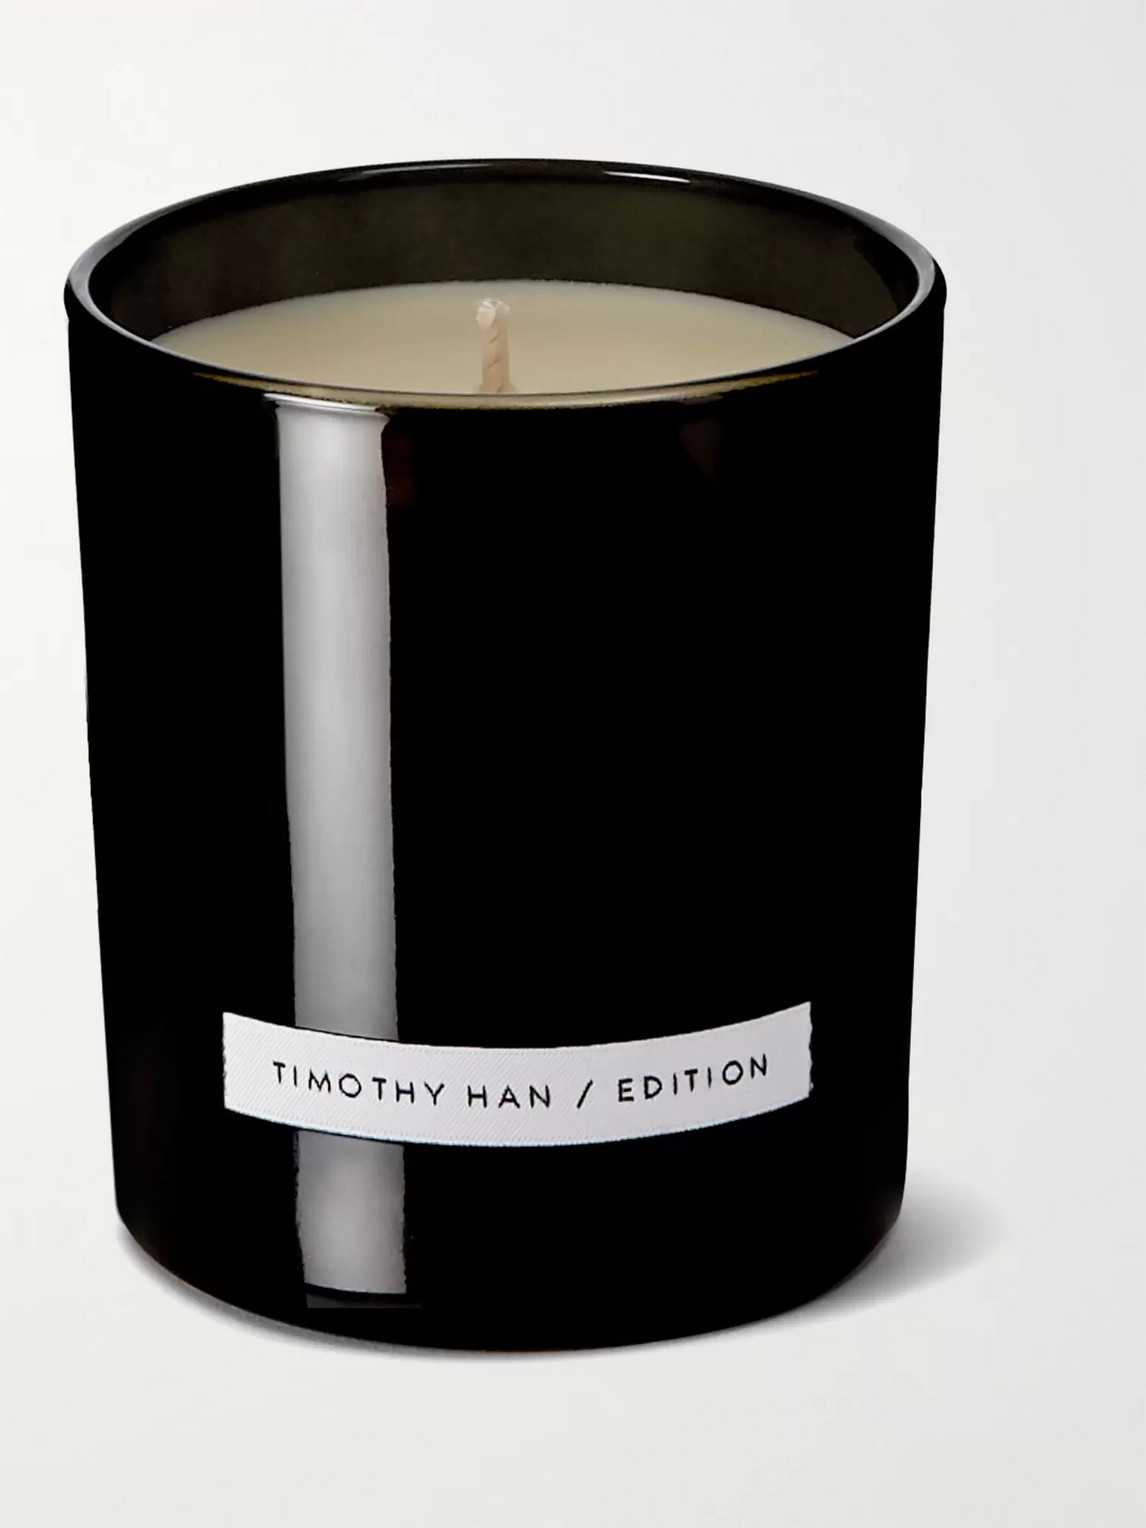 Timothy Han / Edition She Came To Stay Scented Candle, 220g In Colorless